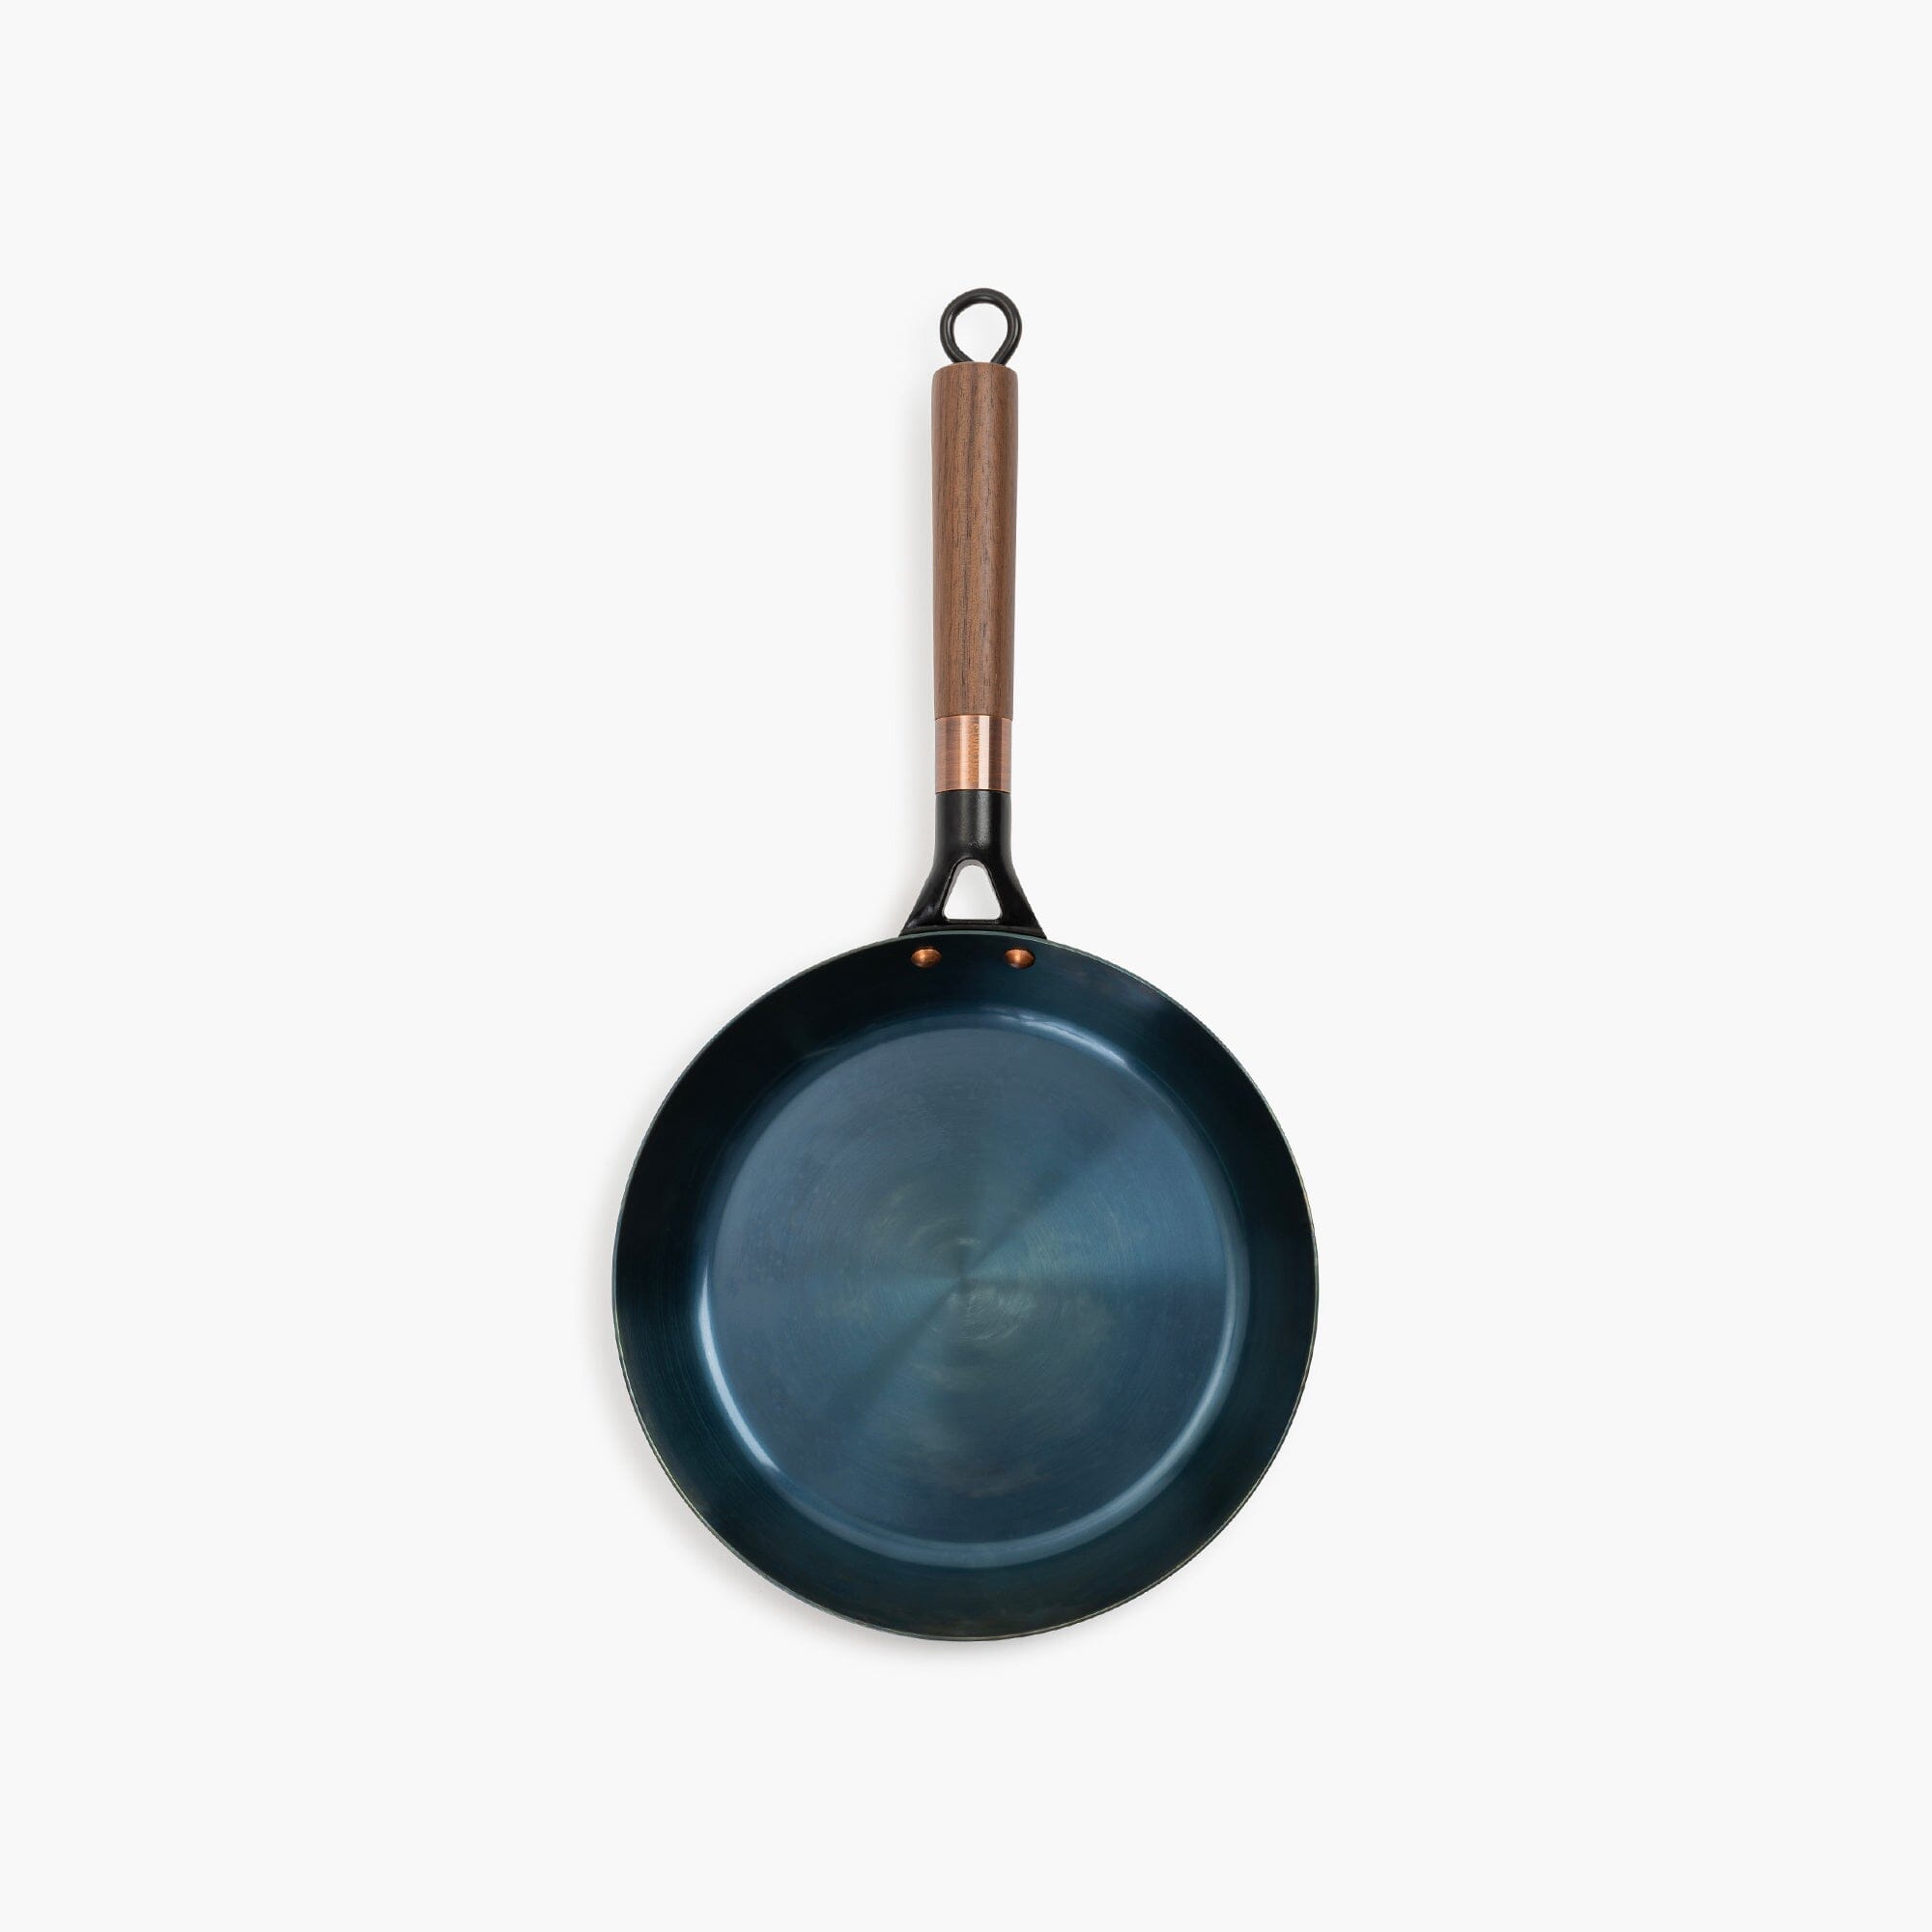 Made In Cookware - 12 Blue 12 Carbon Steel Frying Pan, Silver, Black